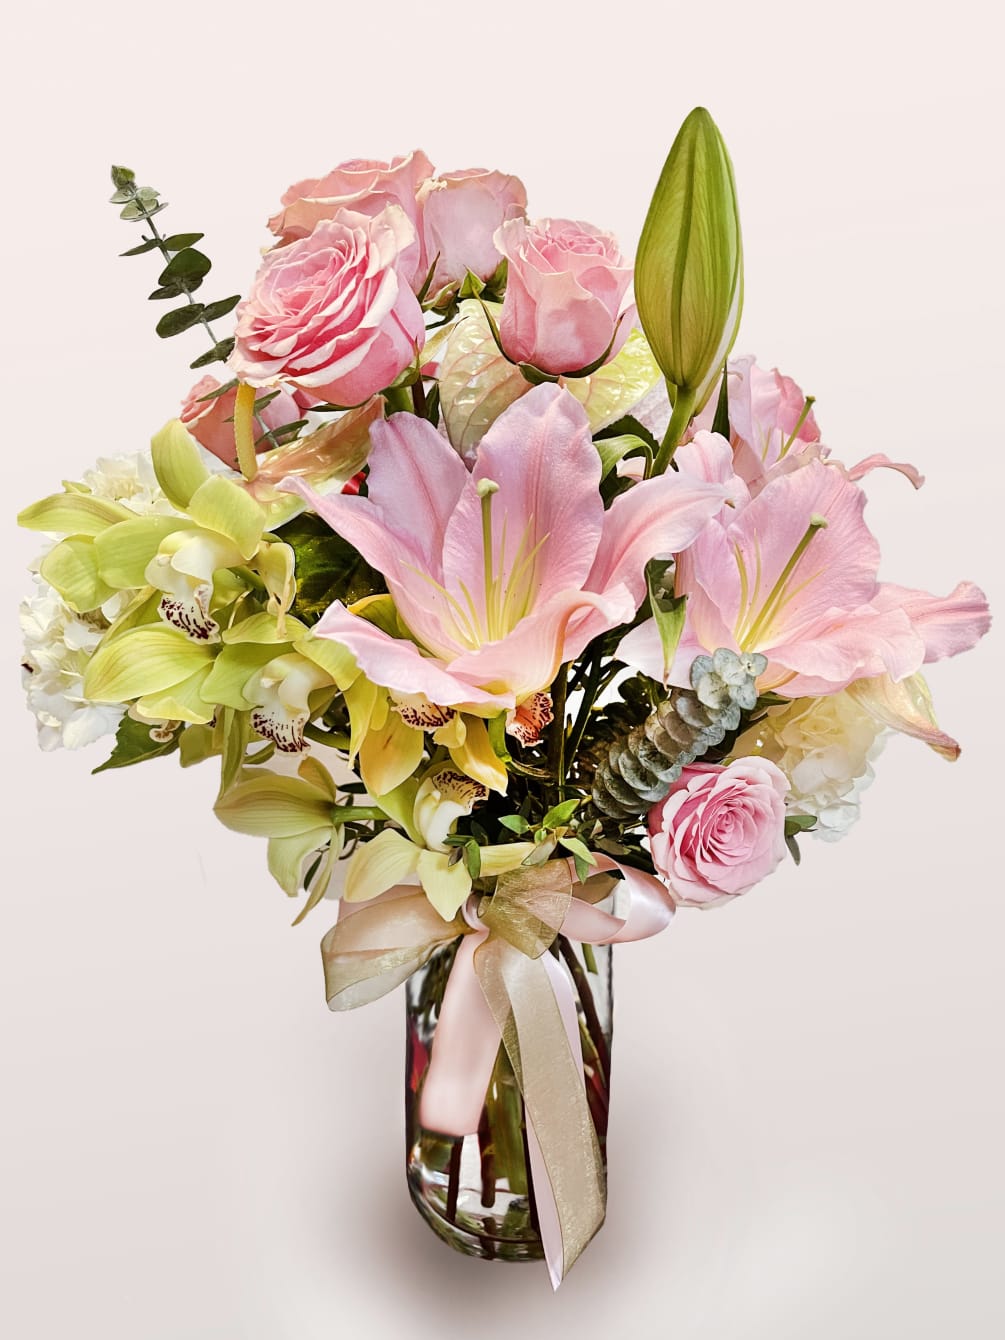 A mix of traditional and tropical flowers combine to create &quot;Sweet Elegance!&quot;